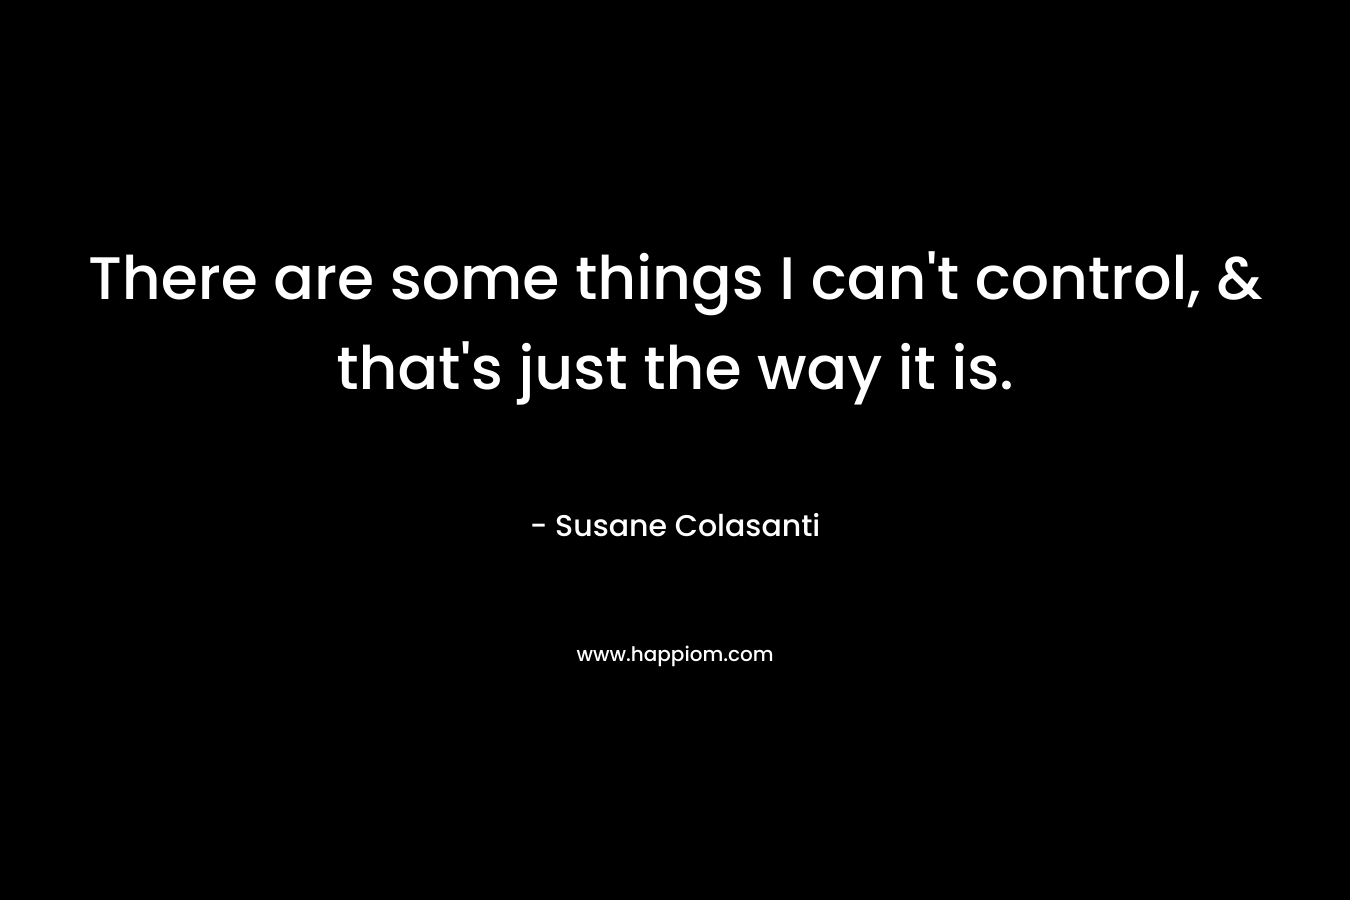 There are some things I can't control, & that's just the way it is.